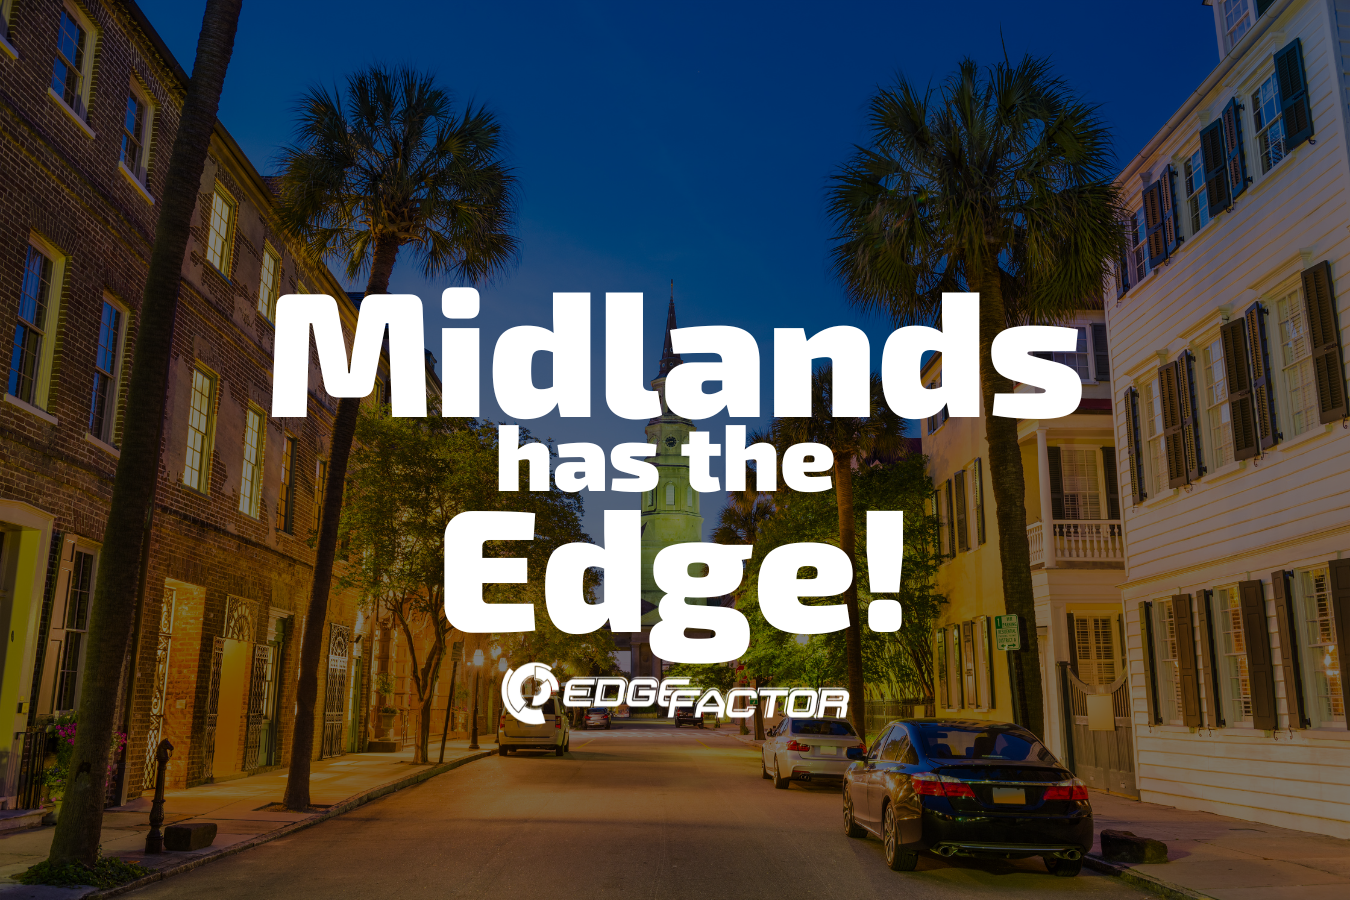 Midlands has the Edge - Discover careers in Midlands, South Carolina